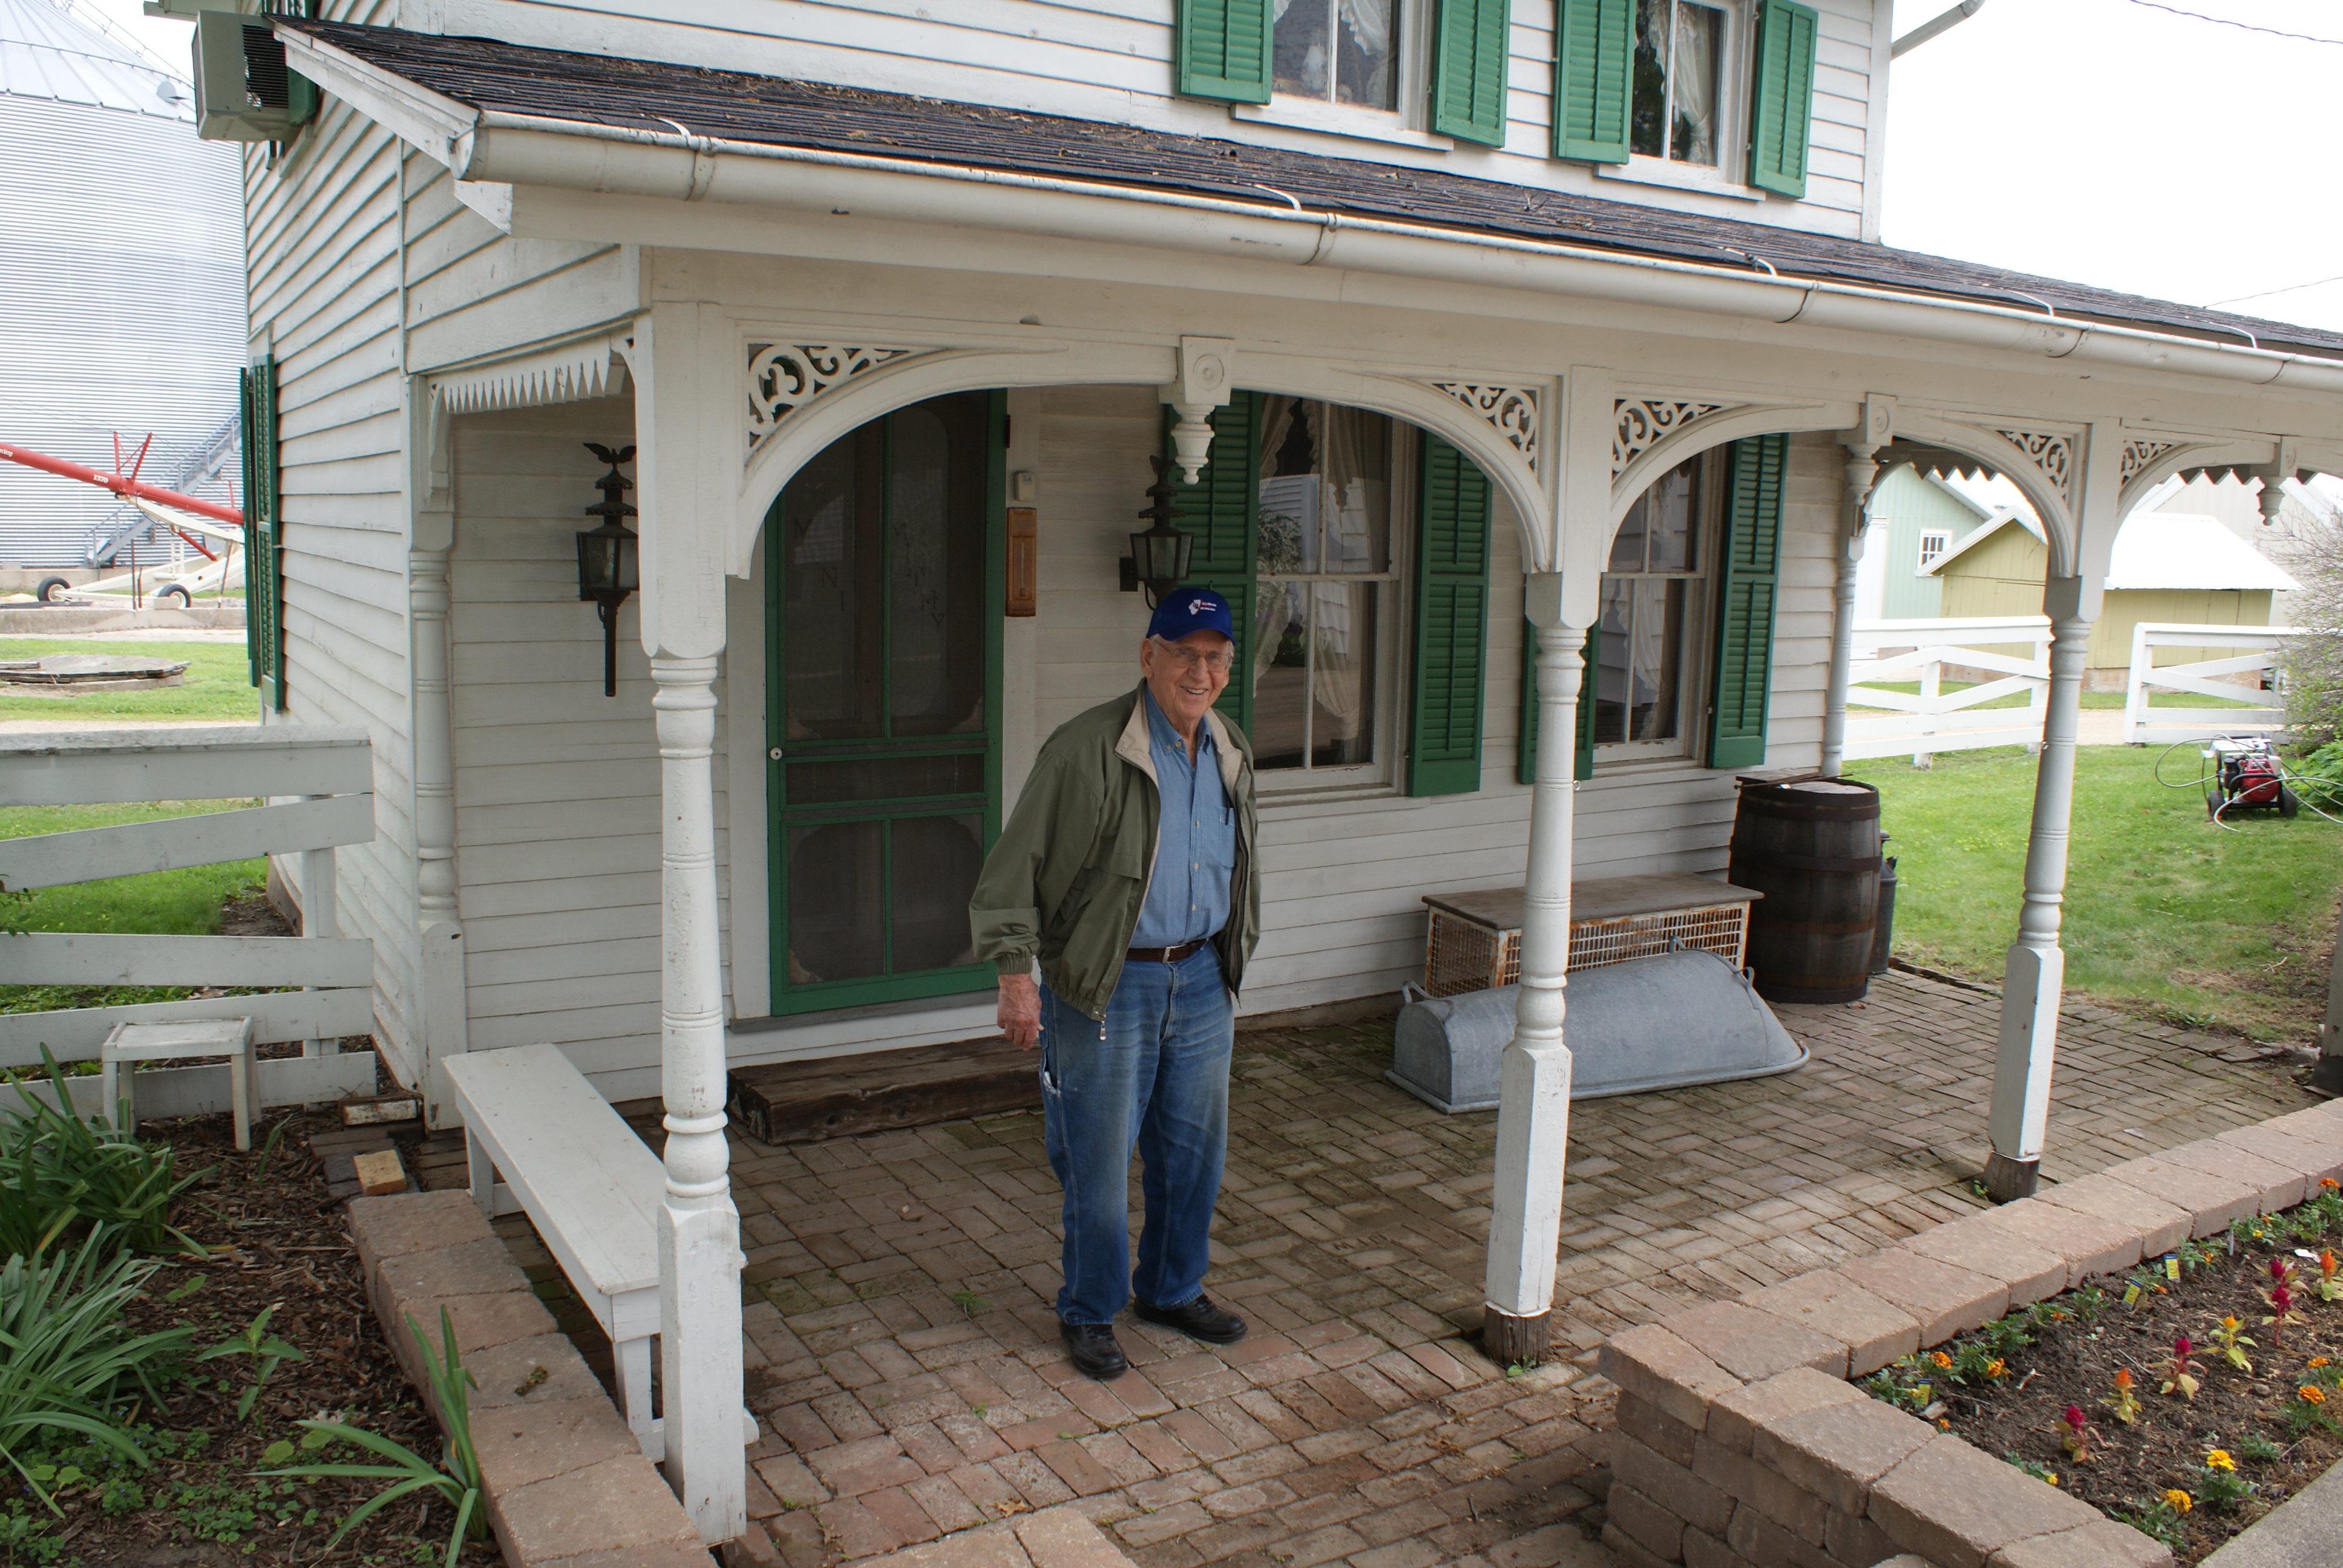 Harold Steele, an amazing man with an amazing farm and home museum